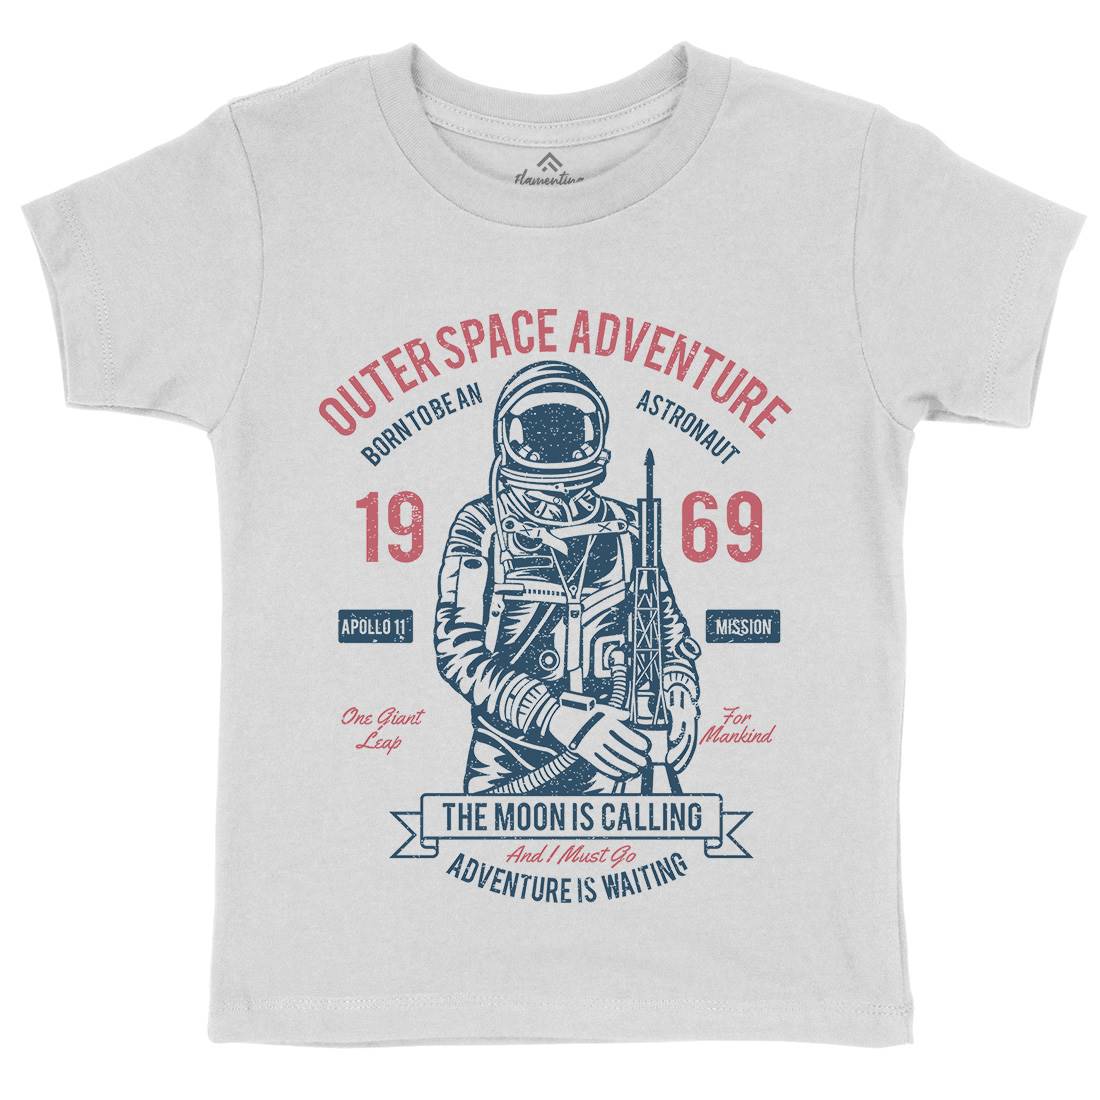 Outer Adventure 69 Kids Crew Neck T-Shirt Space A106